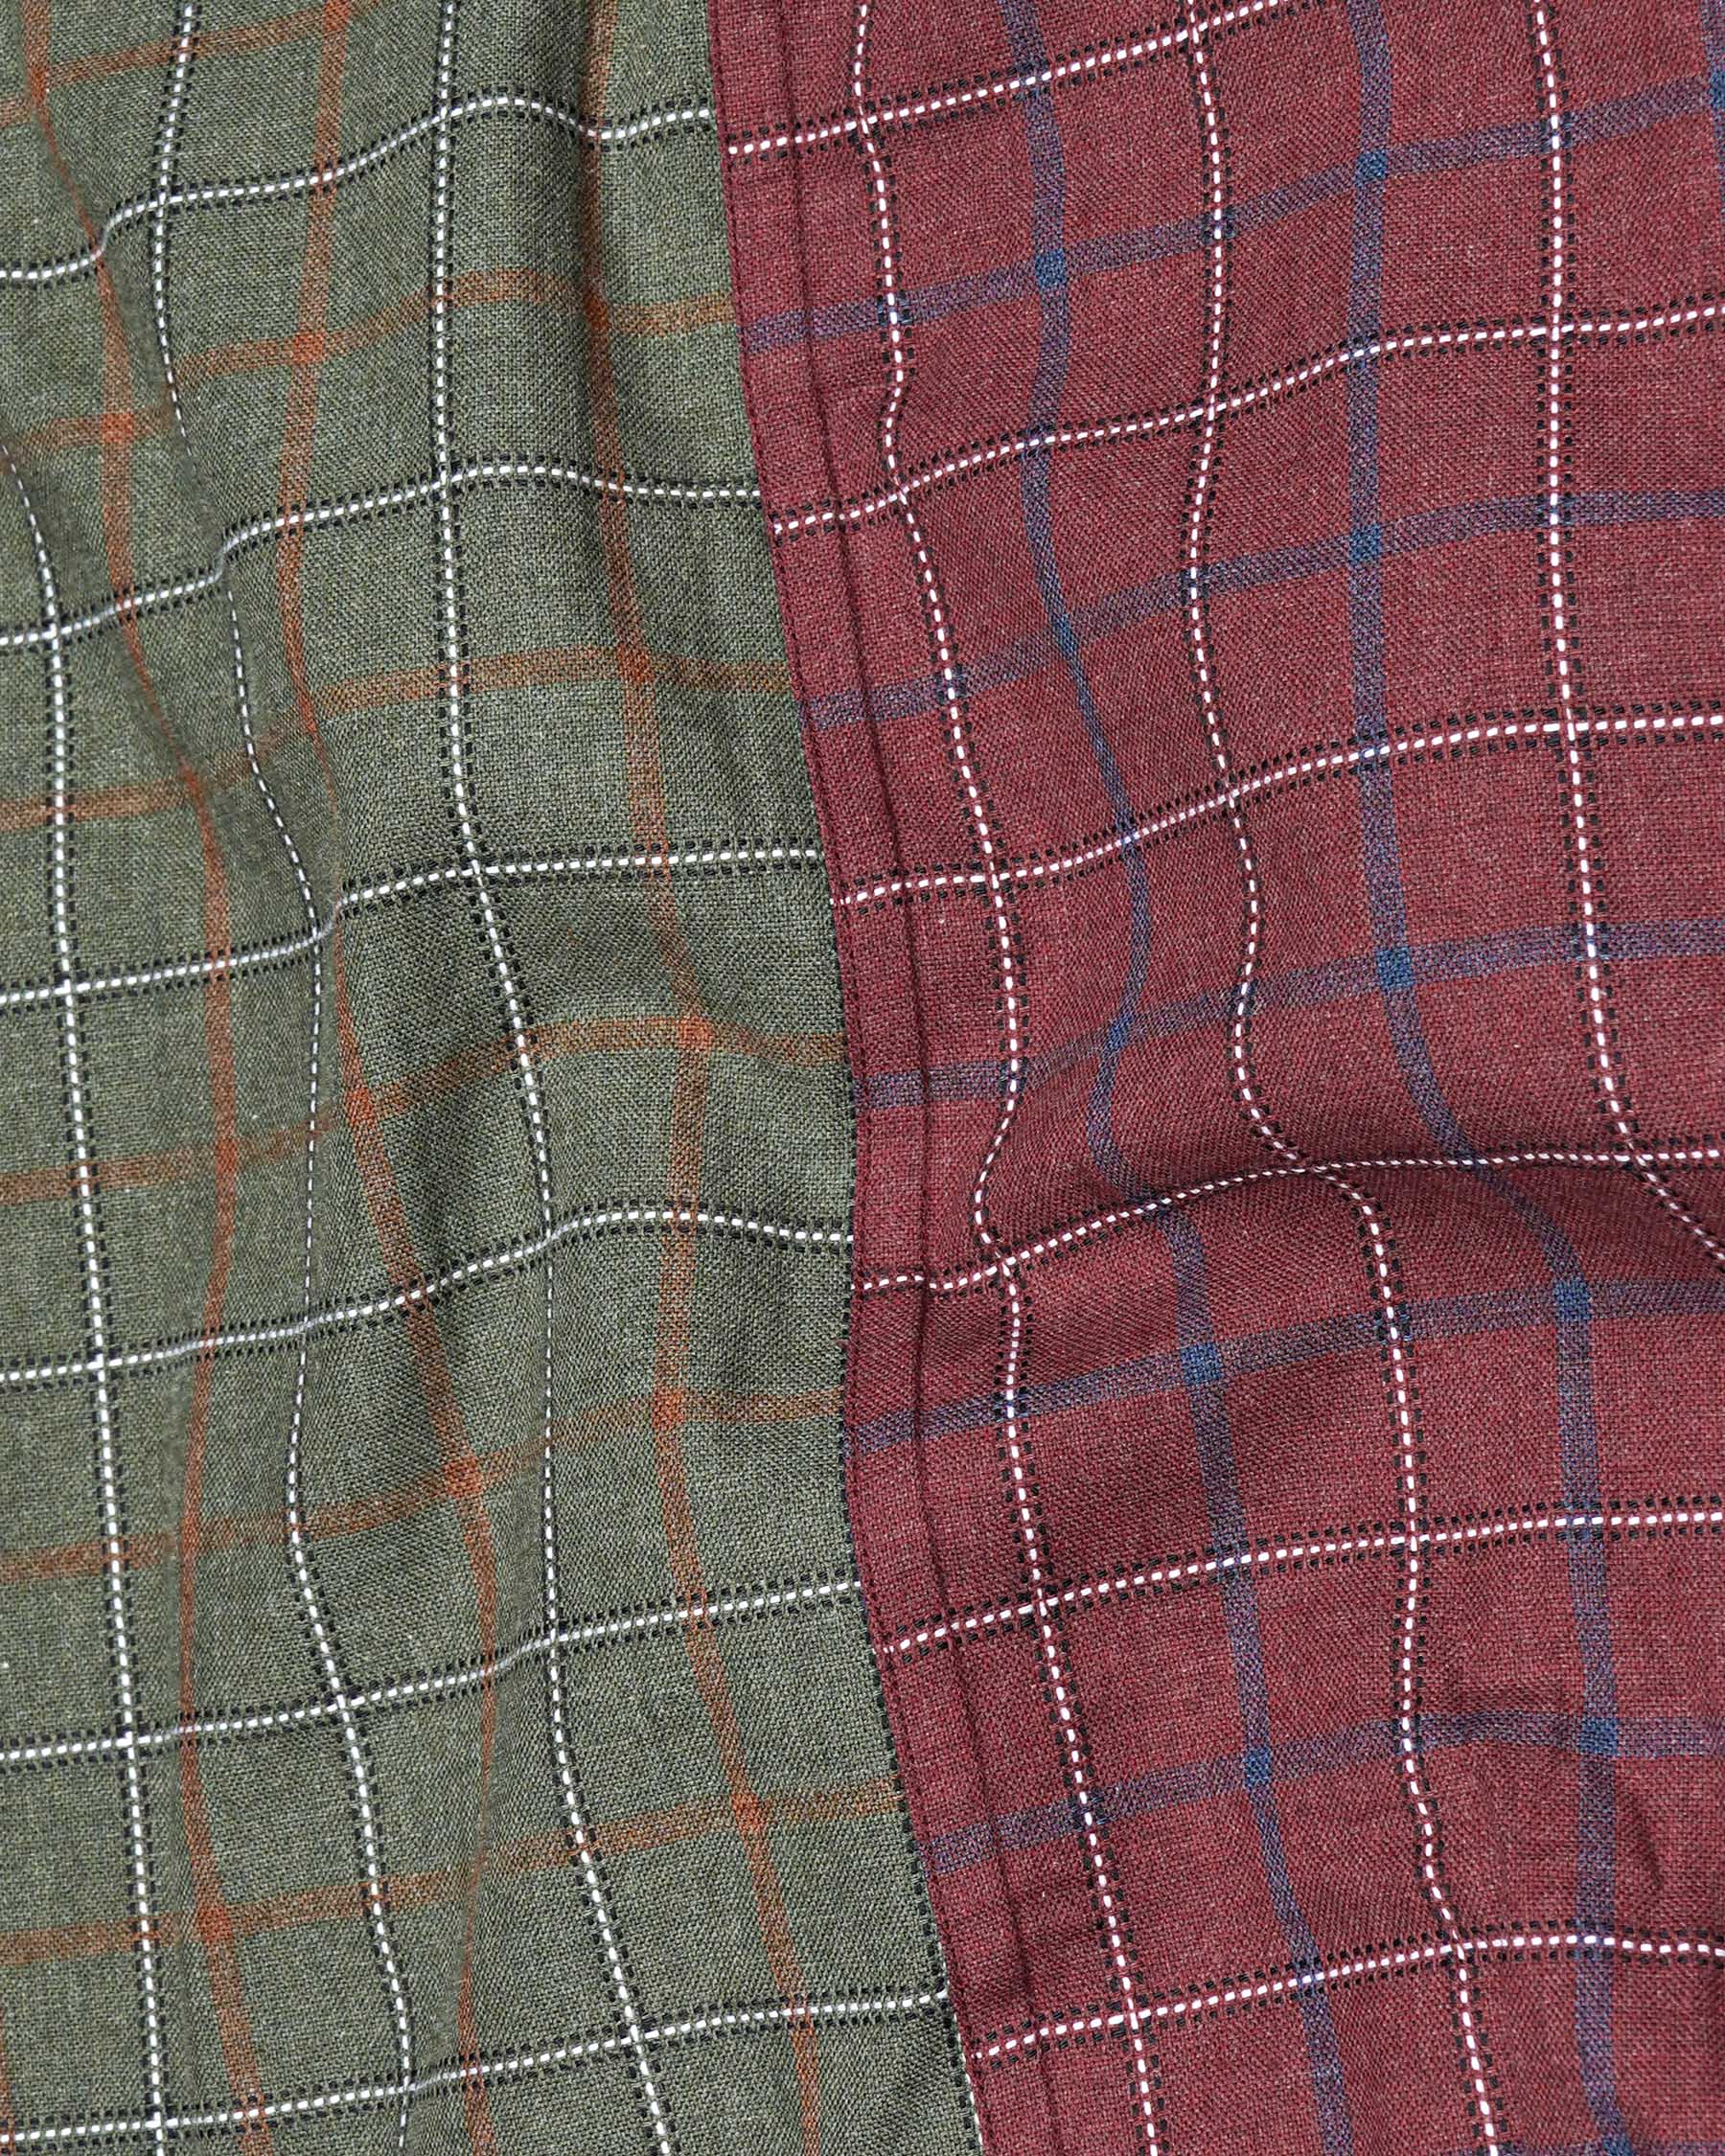 Copper Rust Red and Limed Ash Green Windowpane Dobby Textured Premium Giza Cotton Shirt 7760-BLK-P206-38,7760-BLK-P206-38,7760-BLK-P206-39,7760-BLK-P206-39,7760-BLK-P206-40,7760-BLK-P206-40,7760-BLK-P206-42,7760-BLK-P206-42,7760-BLK-P206-44,7760-BLK-P206-44,7760-BLK-P206-46,7760-BLK-P206-46,7760-BLK-P206-48,7760-BLK-P206-48,7760-BLK-P206-50,7760-BLK-P206-50,7760-BLK-P206-52,7760-BLK-P206-52